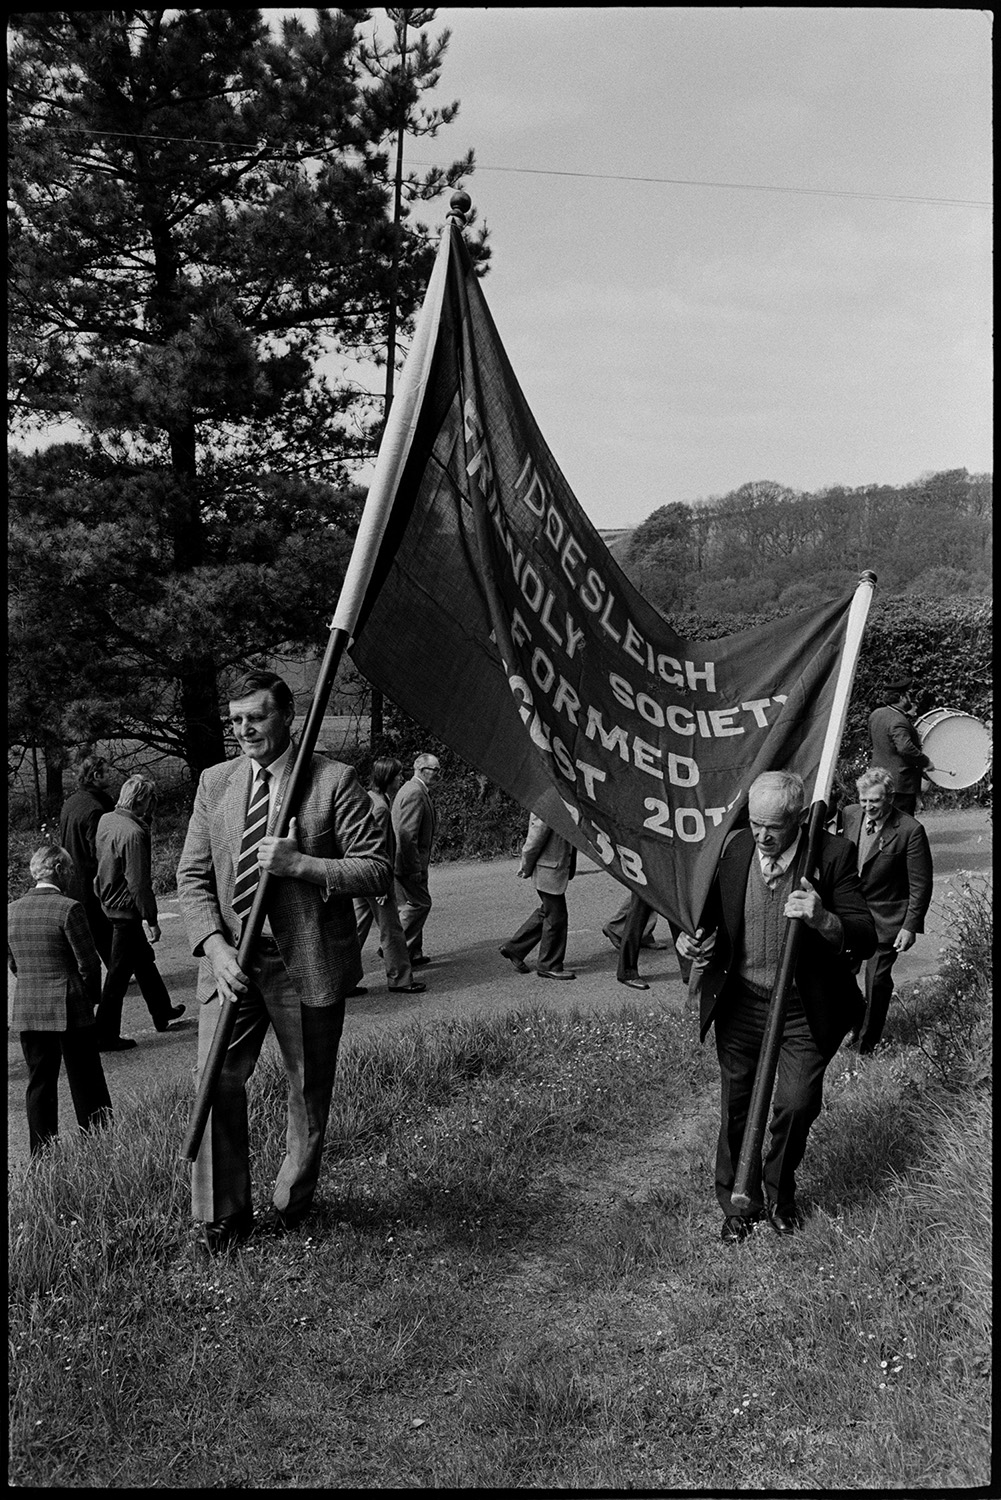 Club Day procession. Band and members marching to the Church. Entering church under banner.
[Men parading along a road and up the Iddesleigh church path in the Iddesleigh Club Day parade. The two men in the front are carrying the Iddesleigh Friendly Society banner.]